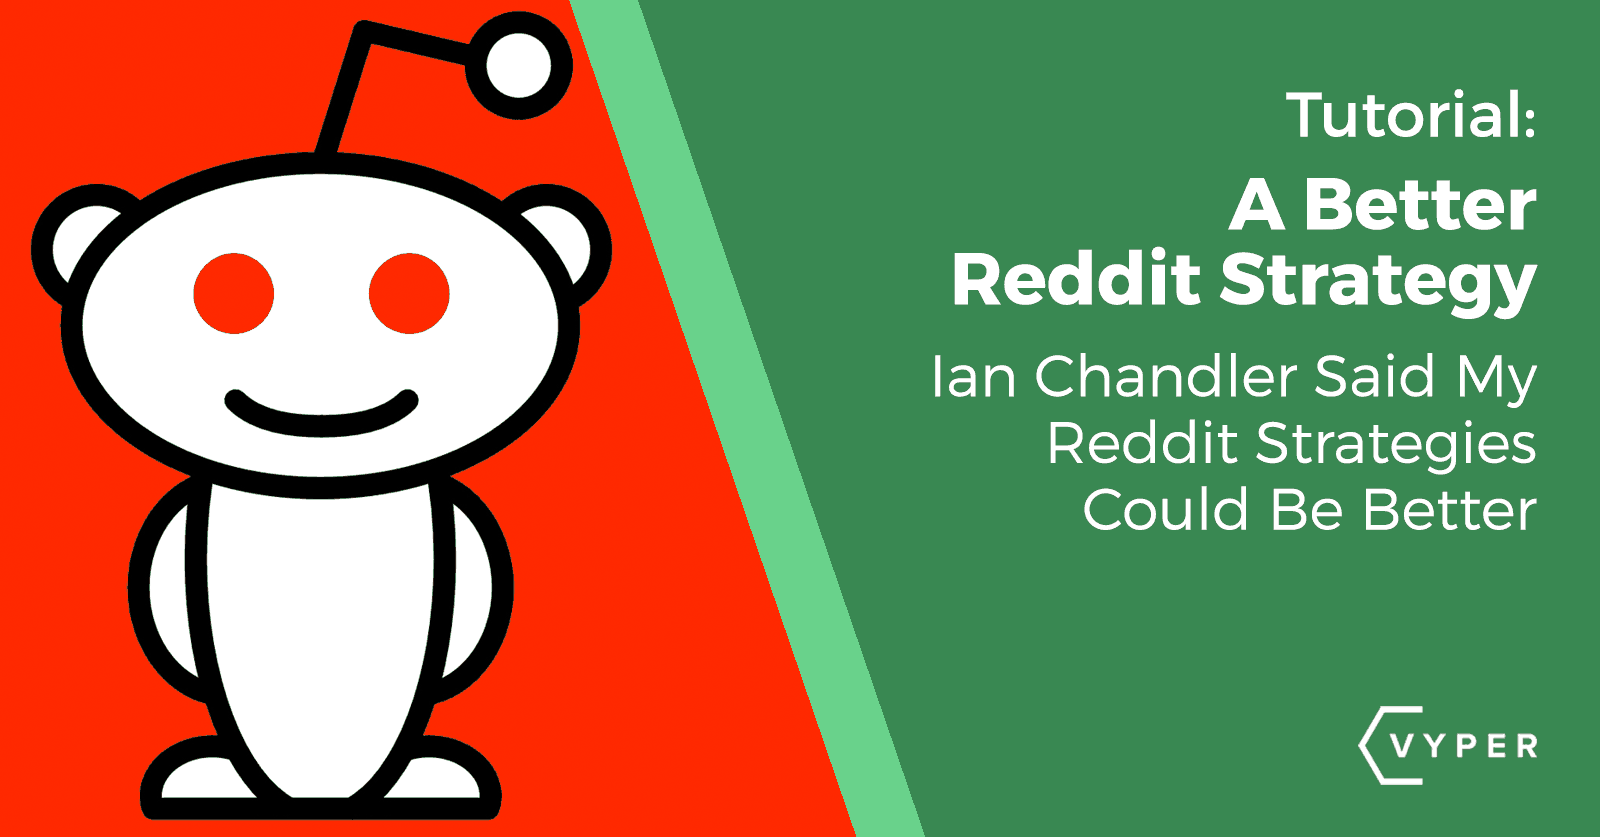 Ian Chandler Said My Reddit Strategies Could Be Better